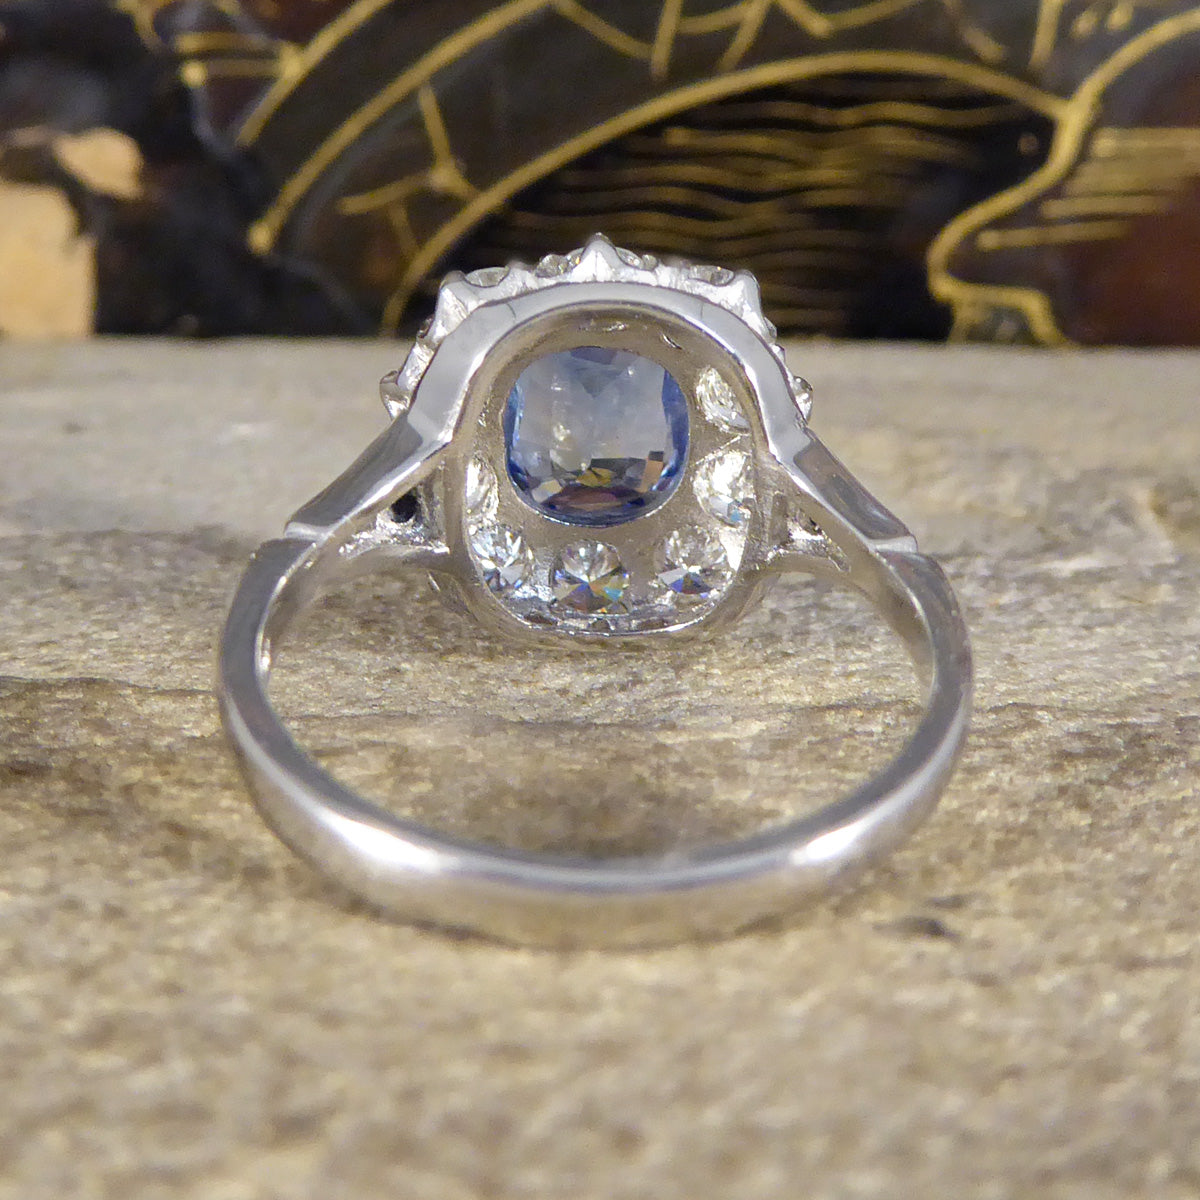 2.04ct Sapphire and 1.25ct Diamond Cluster Ring in 18ct White Gold and Platinum